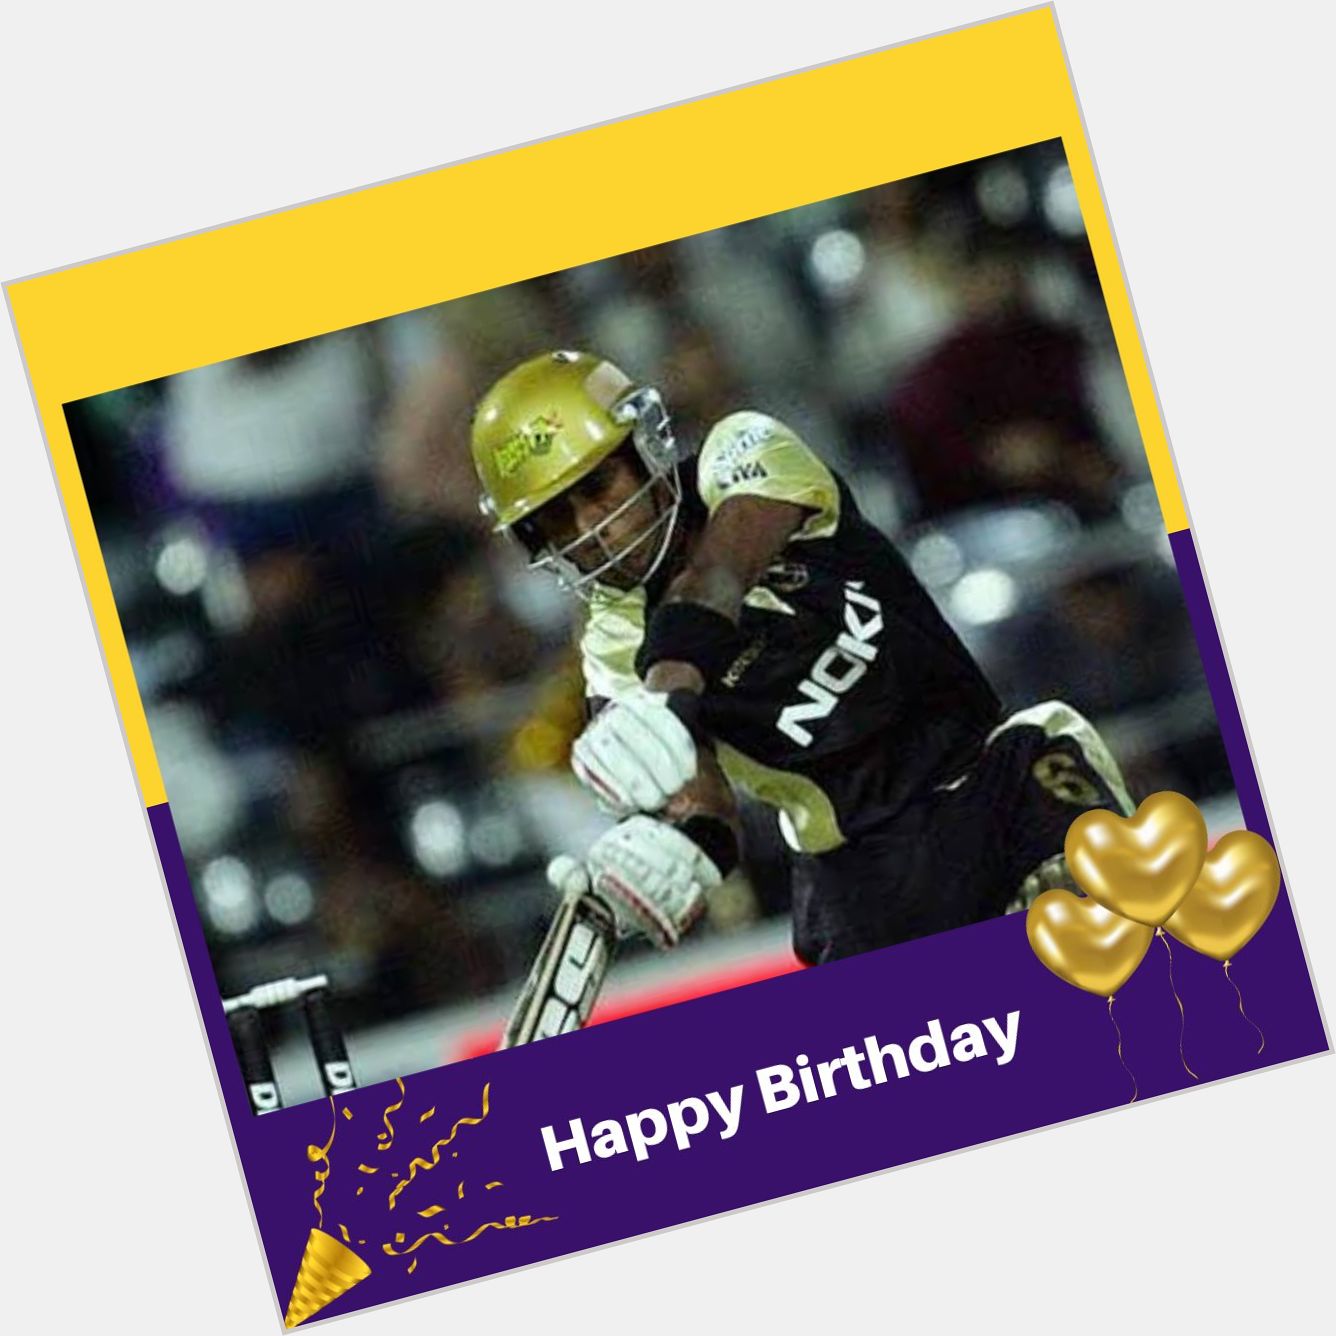 Wishing a very happy birthday to our former Knight, Wriddhiman Saha.          ,         | 